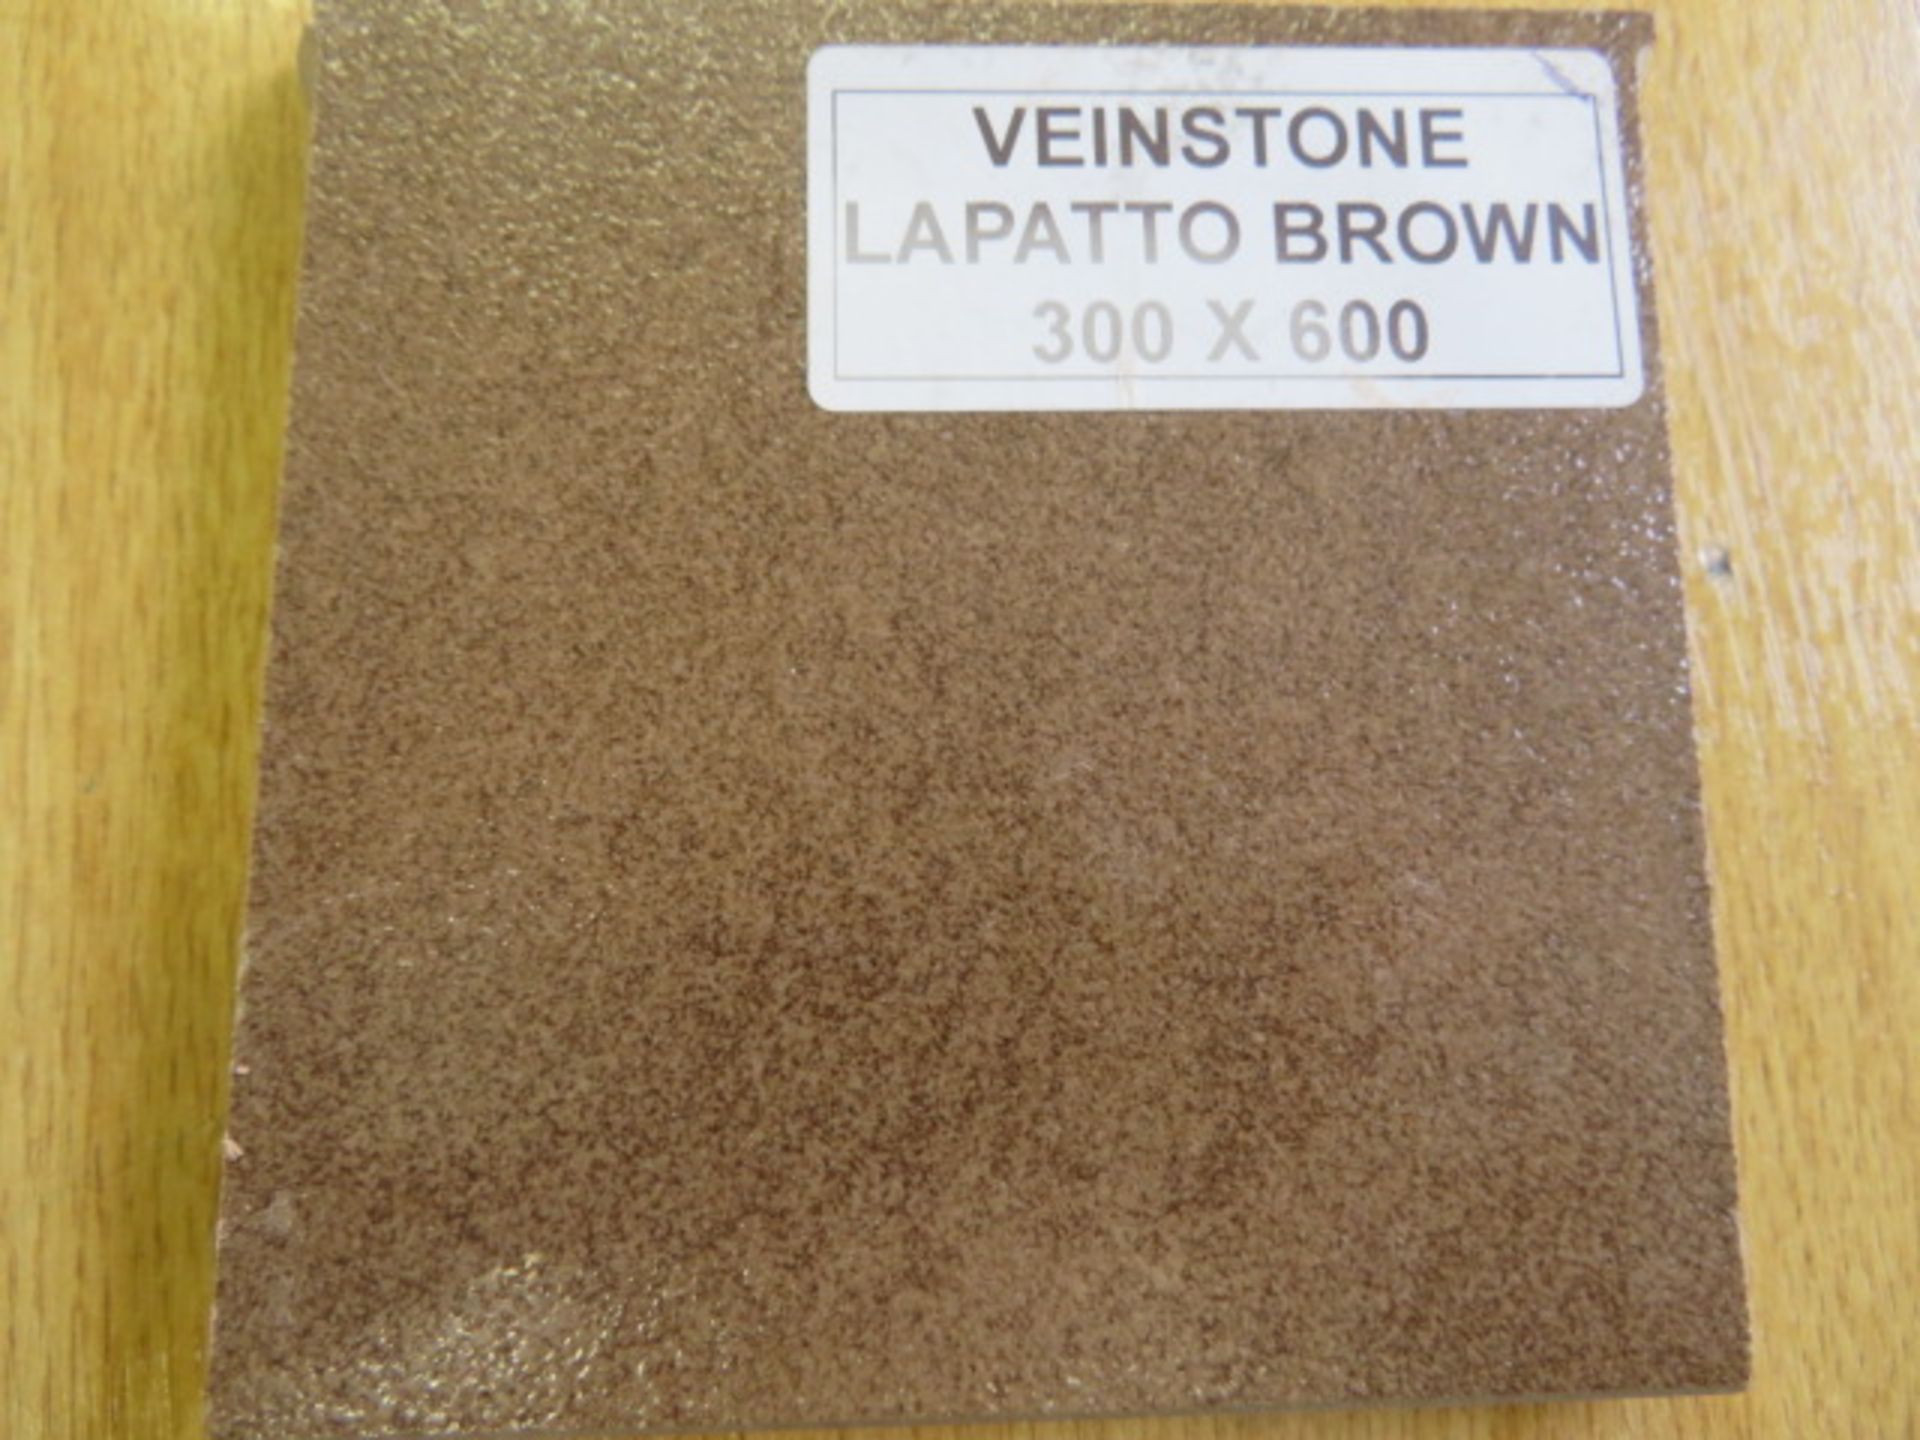 NEW 17.28M2 Square Meters of Veinstone Lapatto Brown Polished Wall and Floor Tiles. 300x600mm, 1. - Image 2 of 2